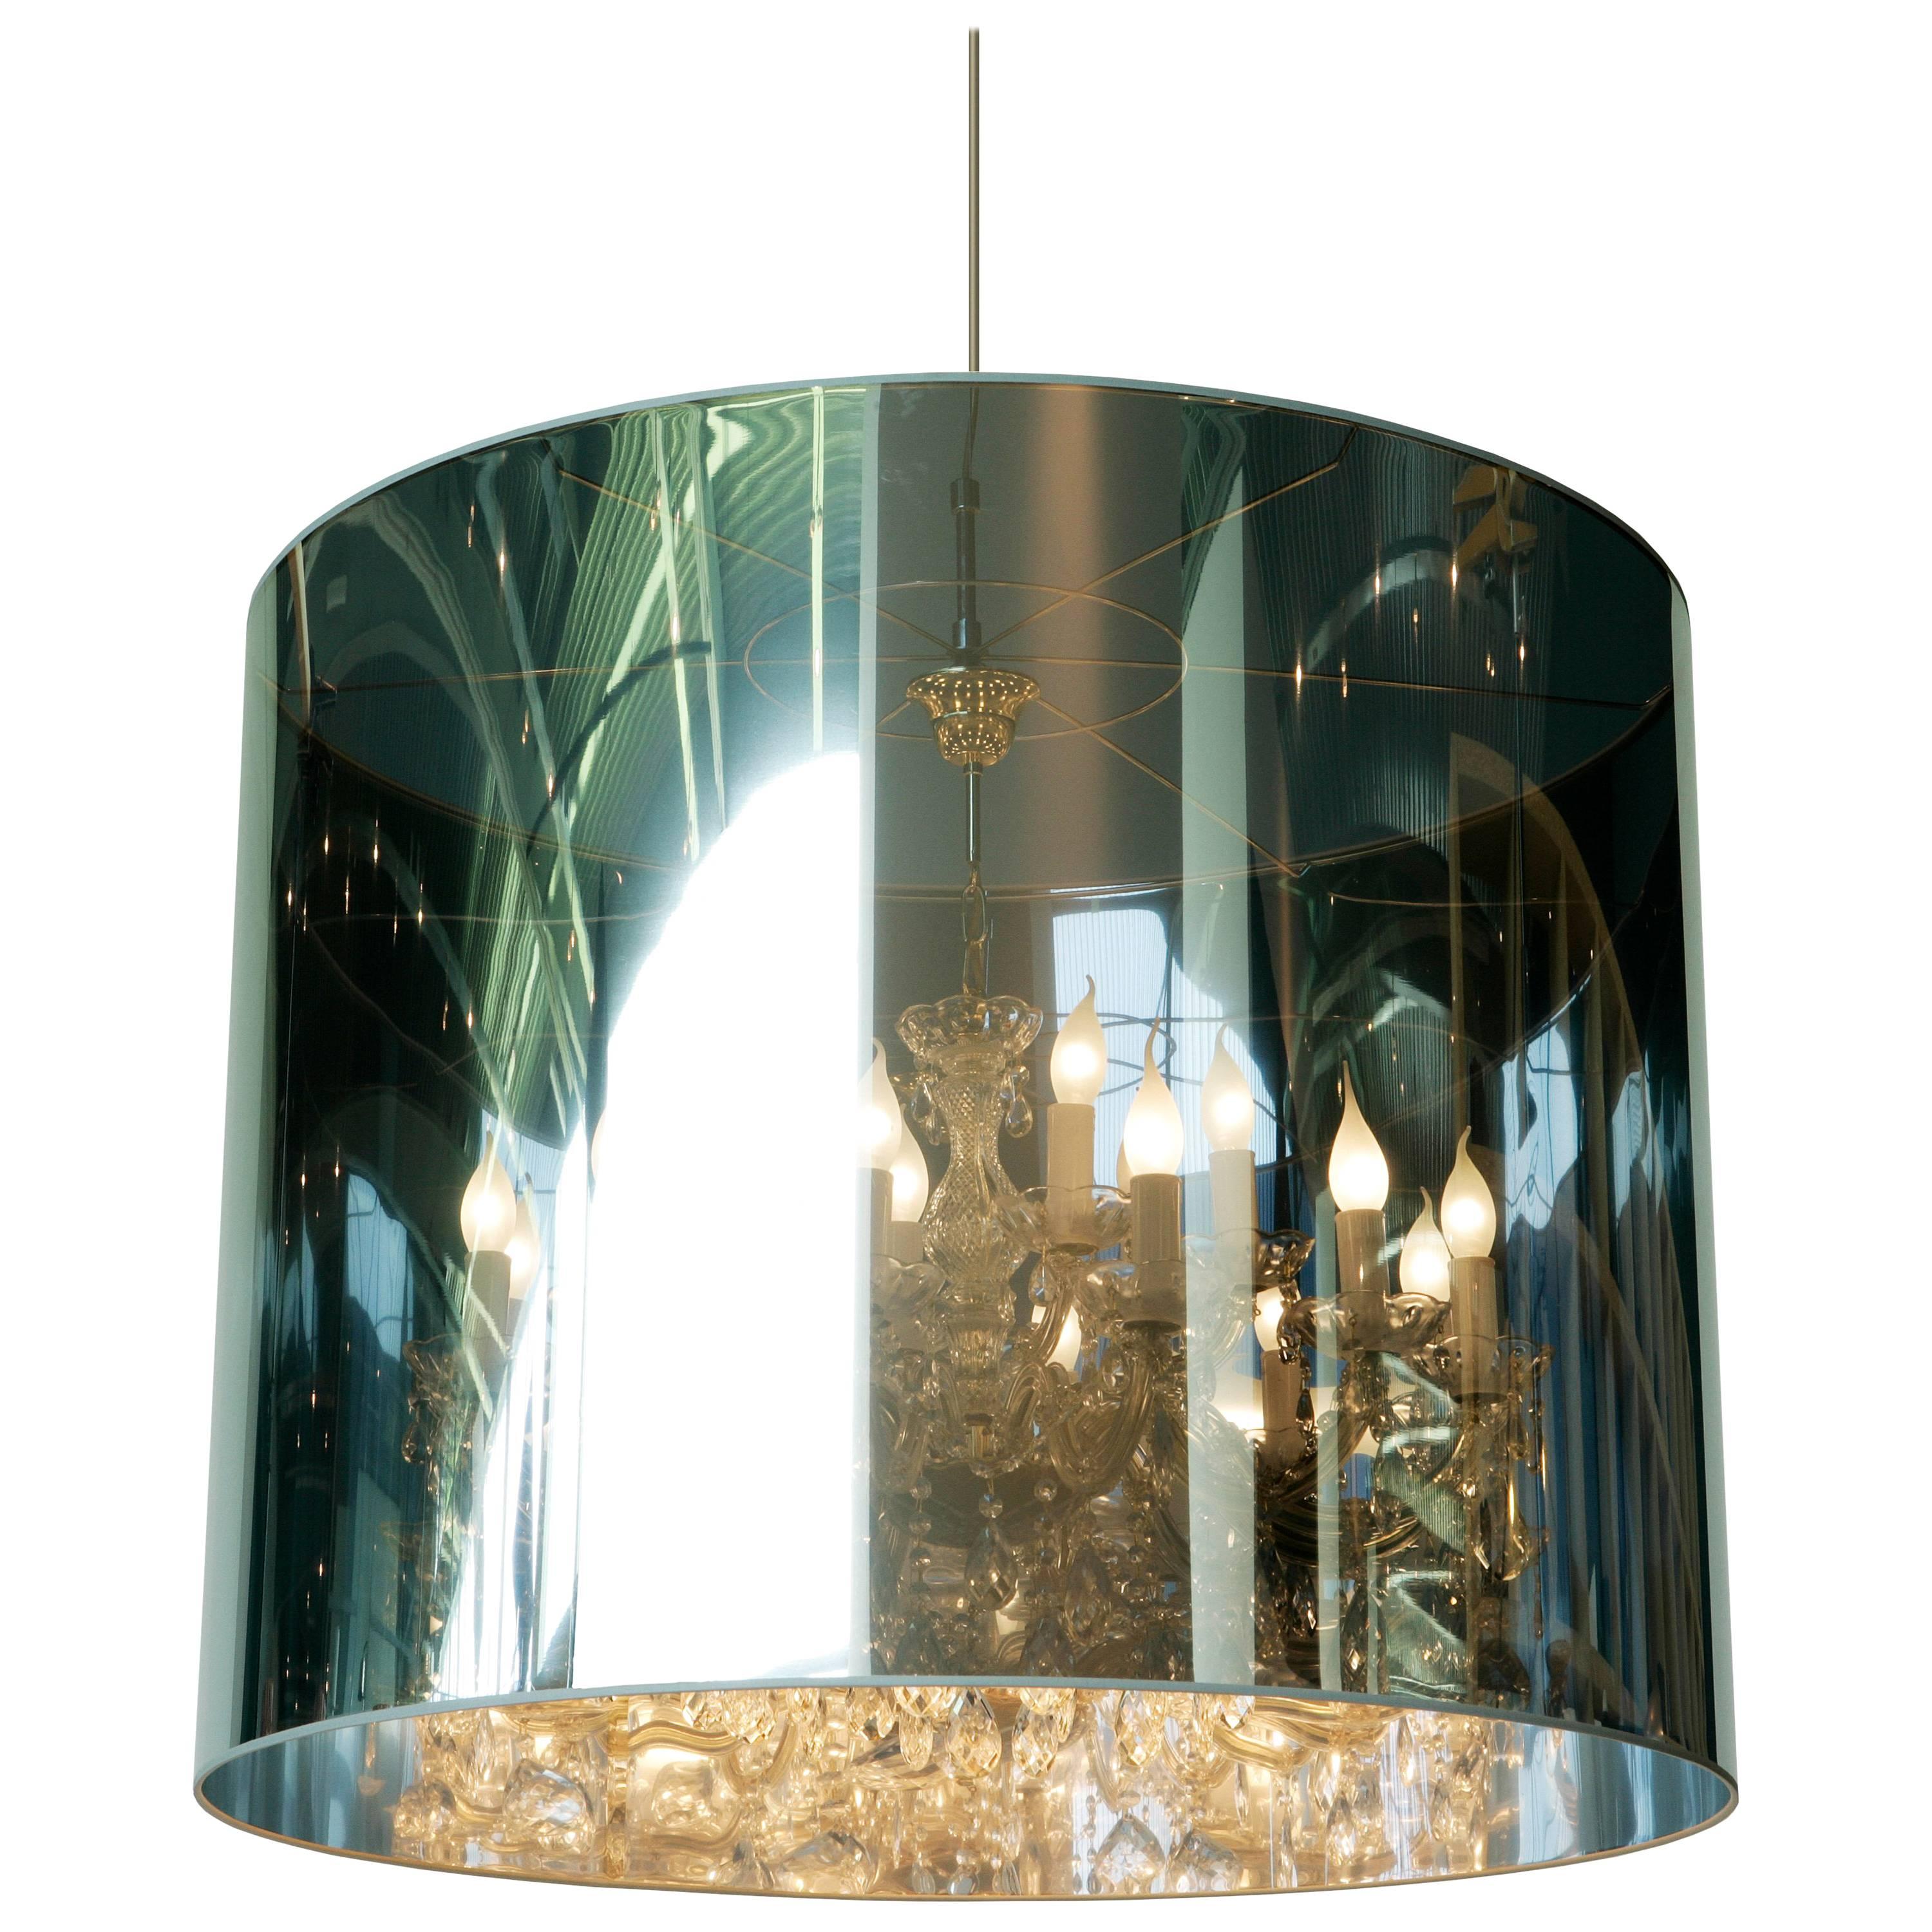 Moooi Light Shade Shade 95 by Jurgen Bey For Sale